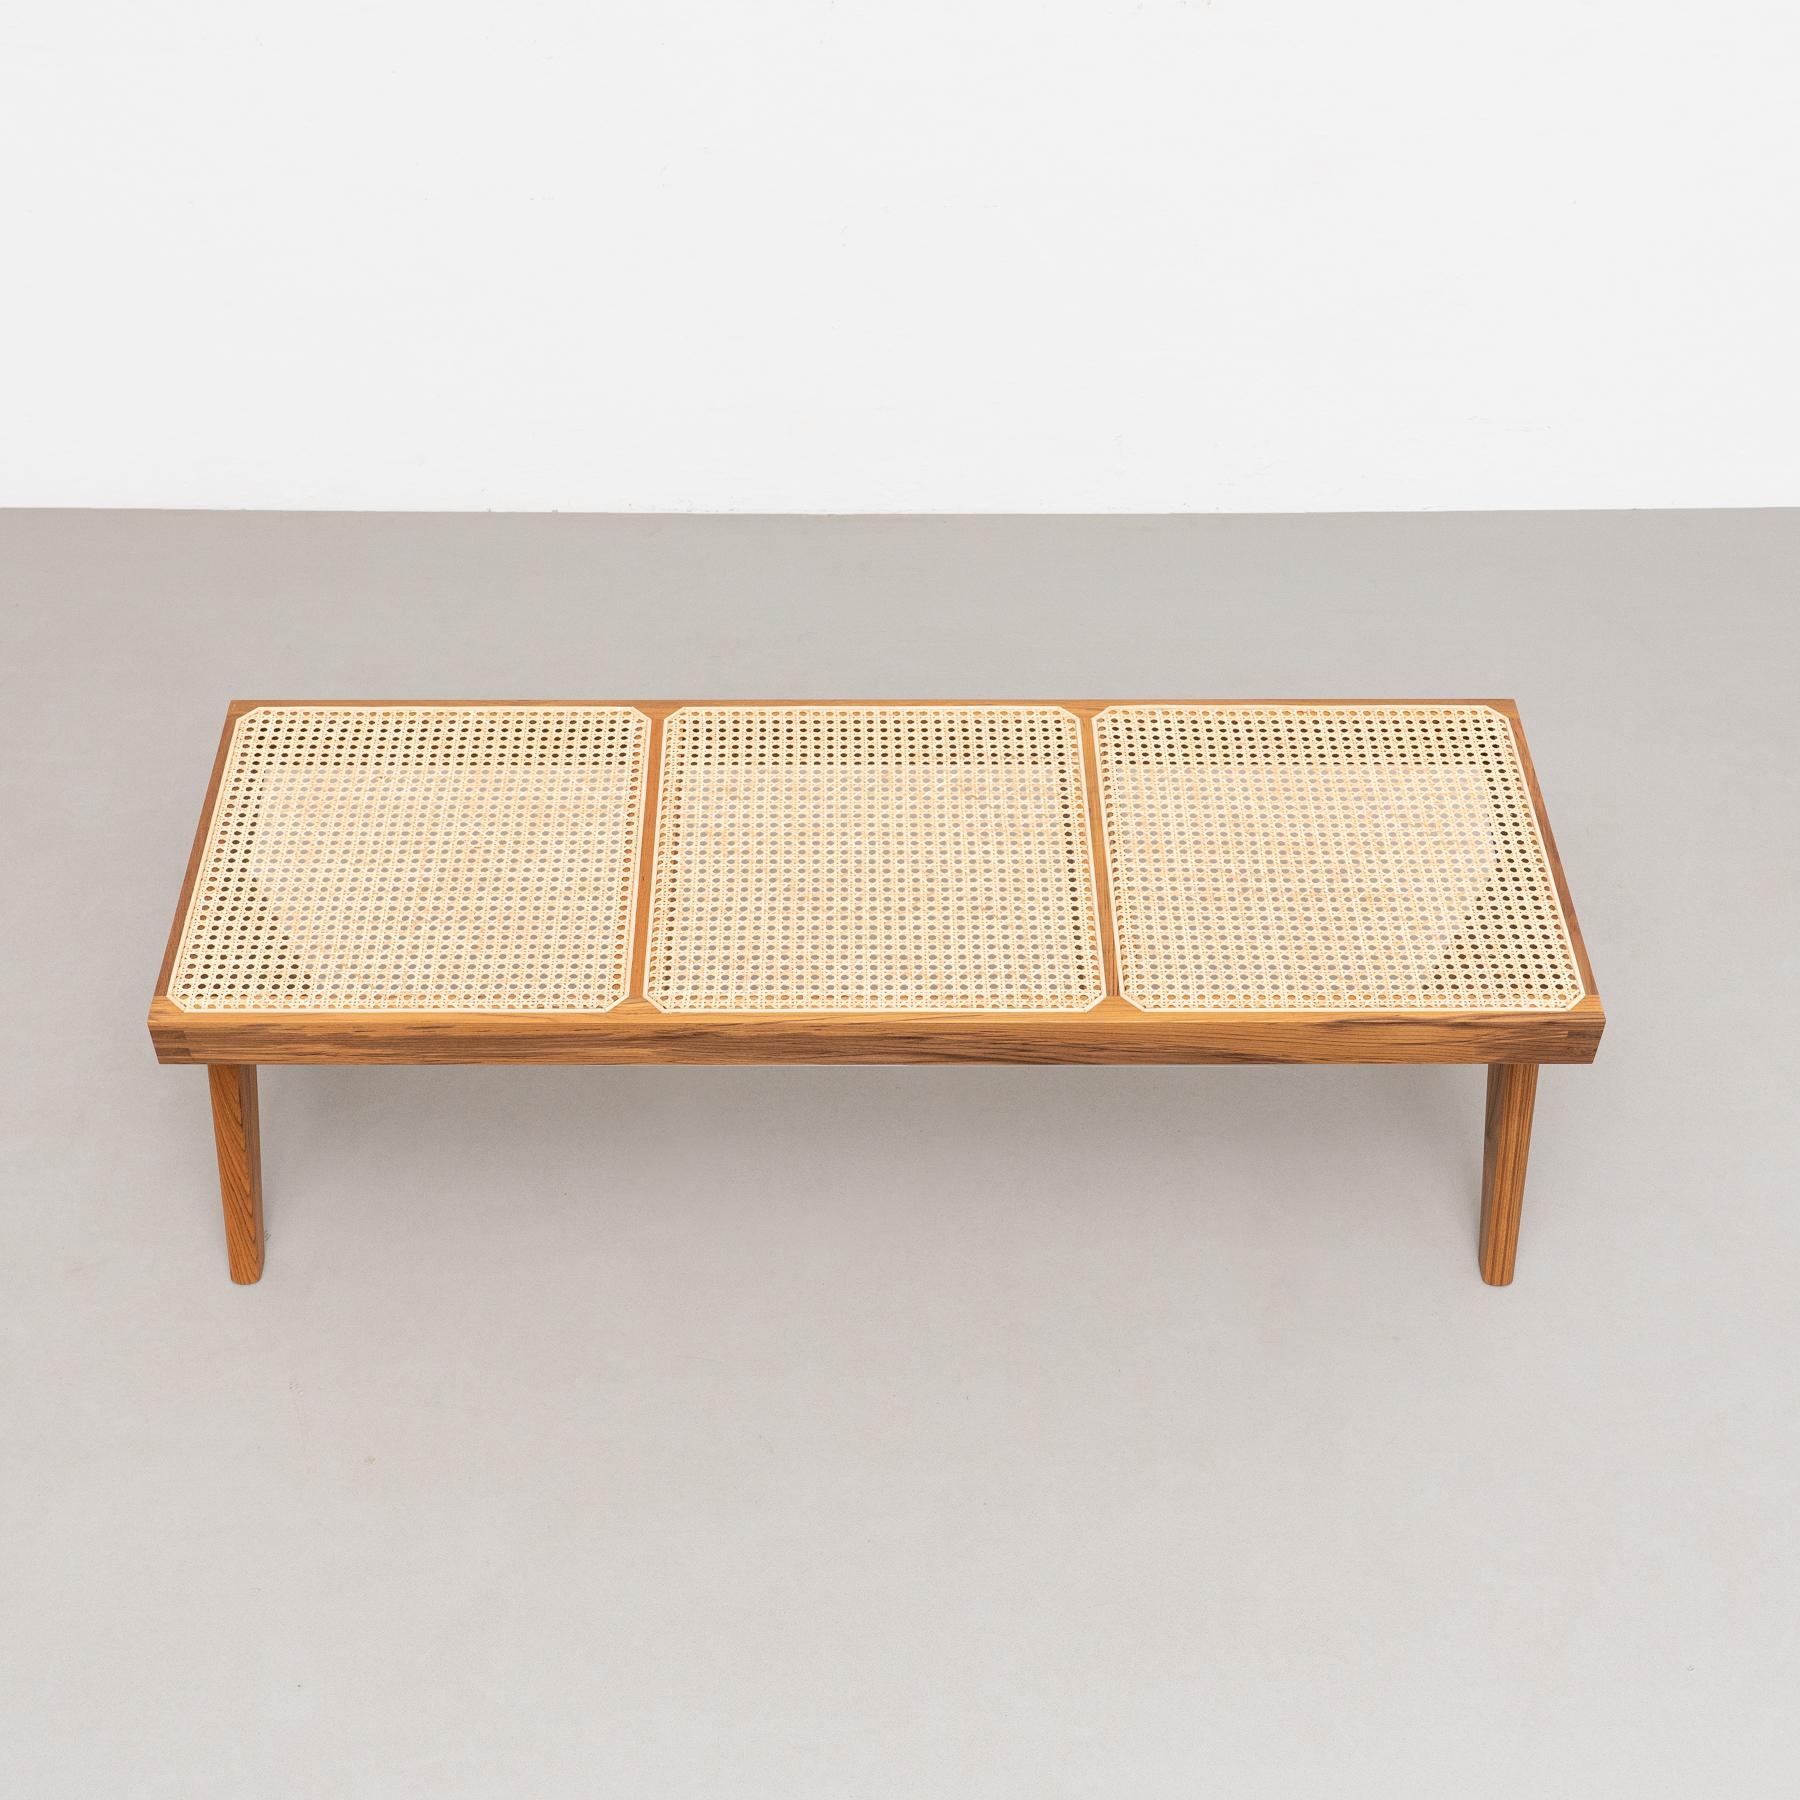 Pierre Jeanneret 057 Civil Bench, Wood and Woven Viennese Cane 6